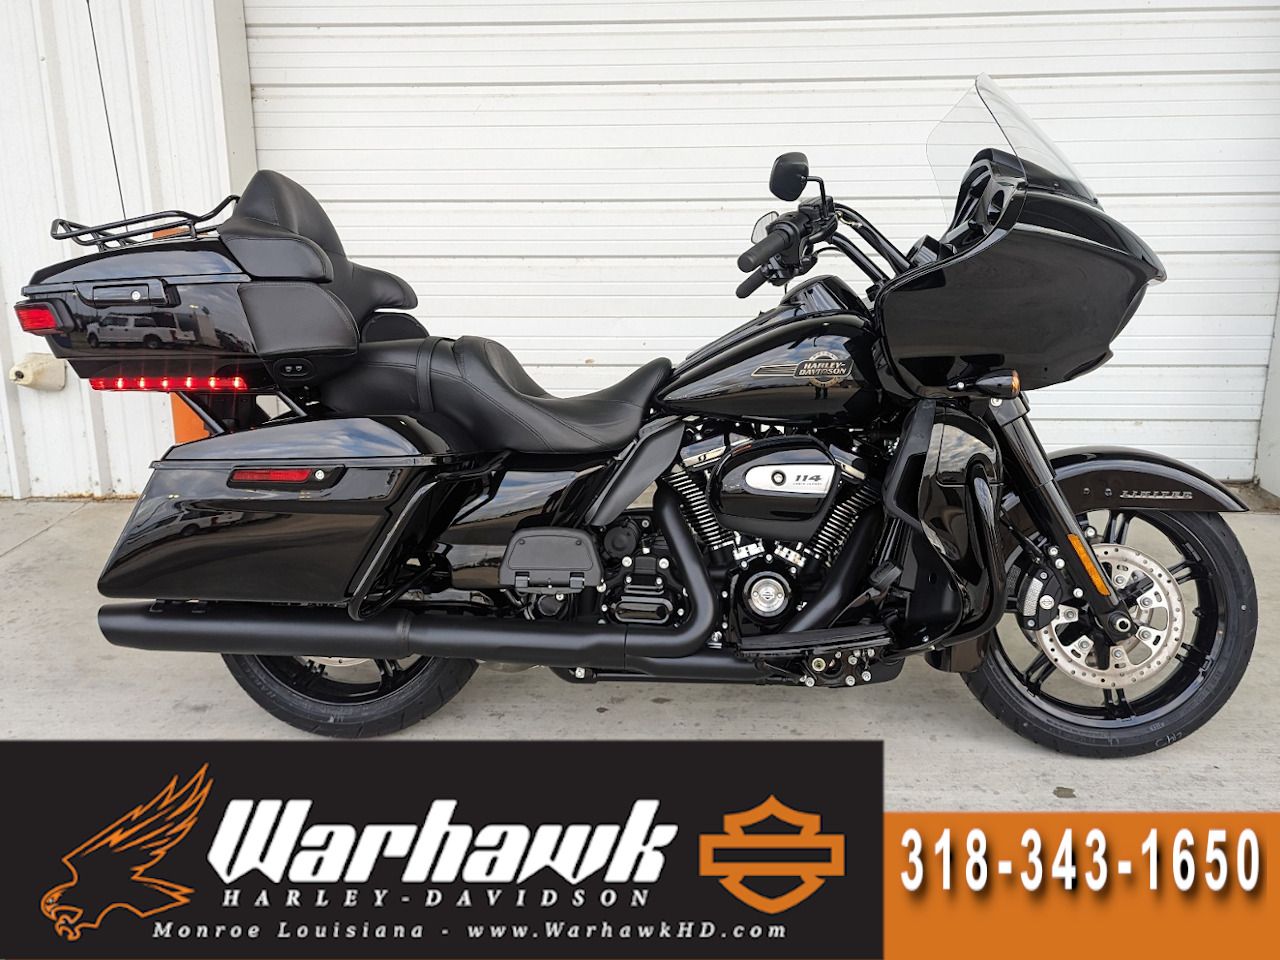 new 2023 hafley davidson road glide limited for sale near me - Photo 1